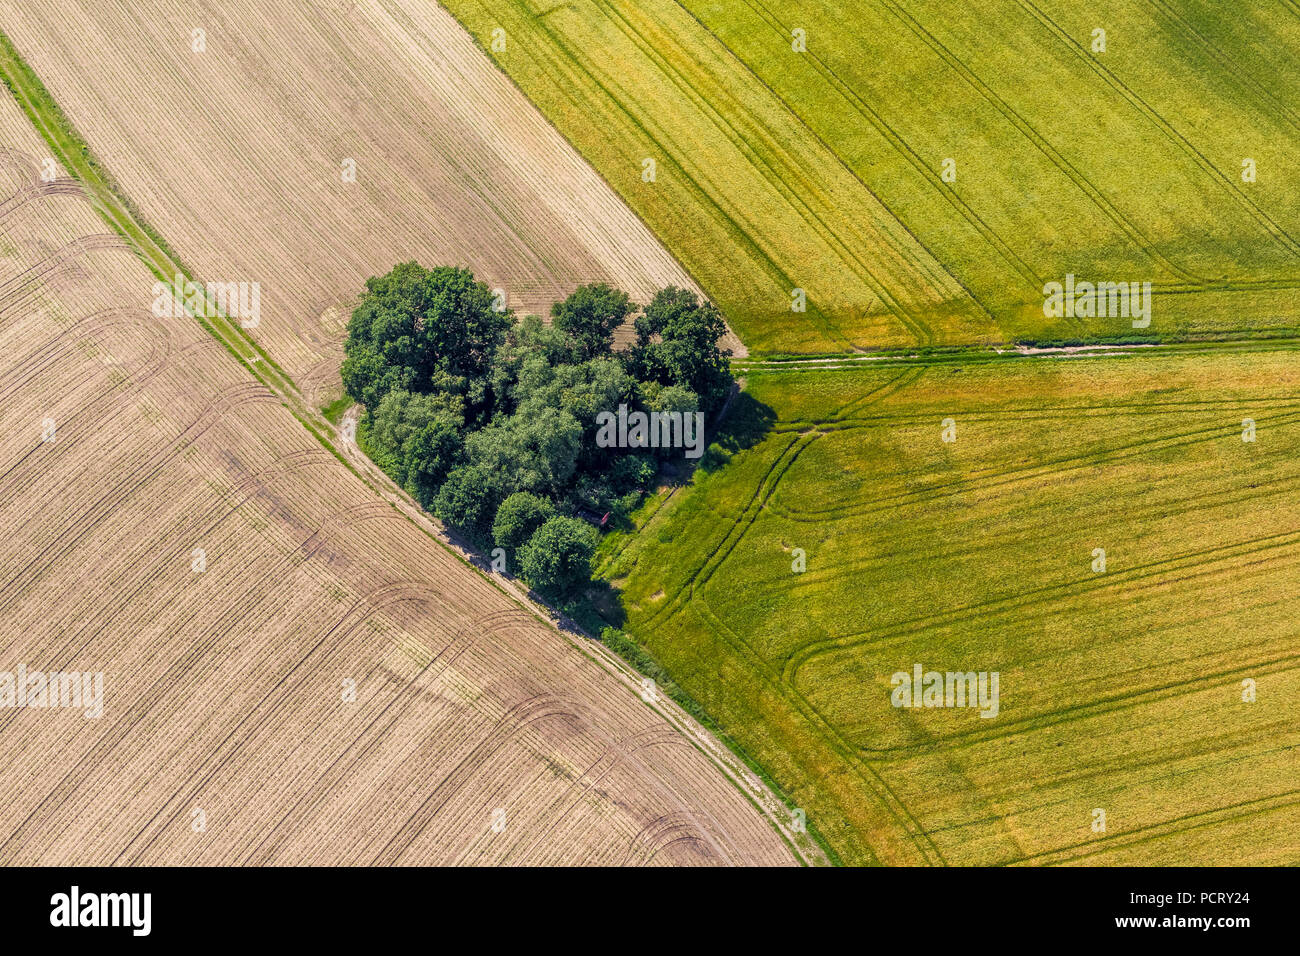 Group of trees in the shape of a heart, heart shape, fields and trees and paths, dirt road, Datteln, Ruhr area, North Rhine-Westphalia, Germany Stock Photo